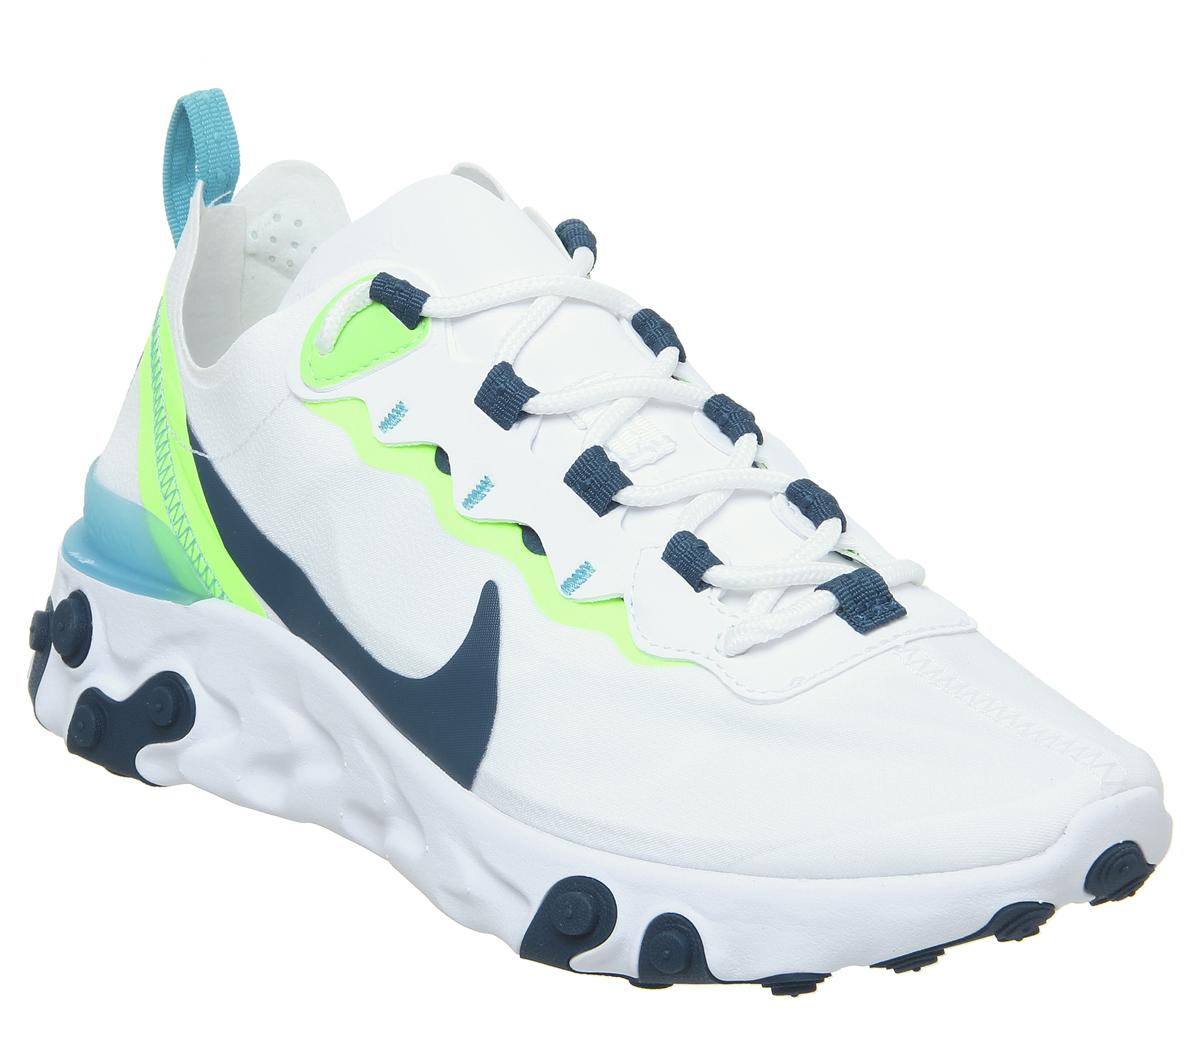 nike react element 55 trainers in white and blue